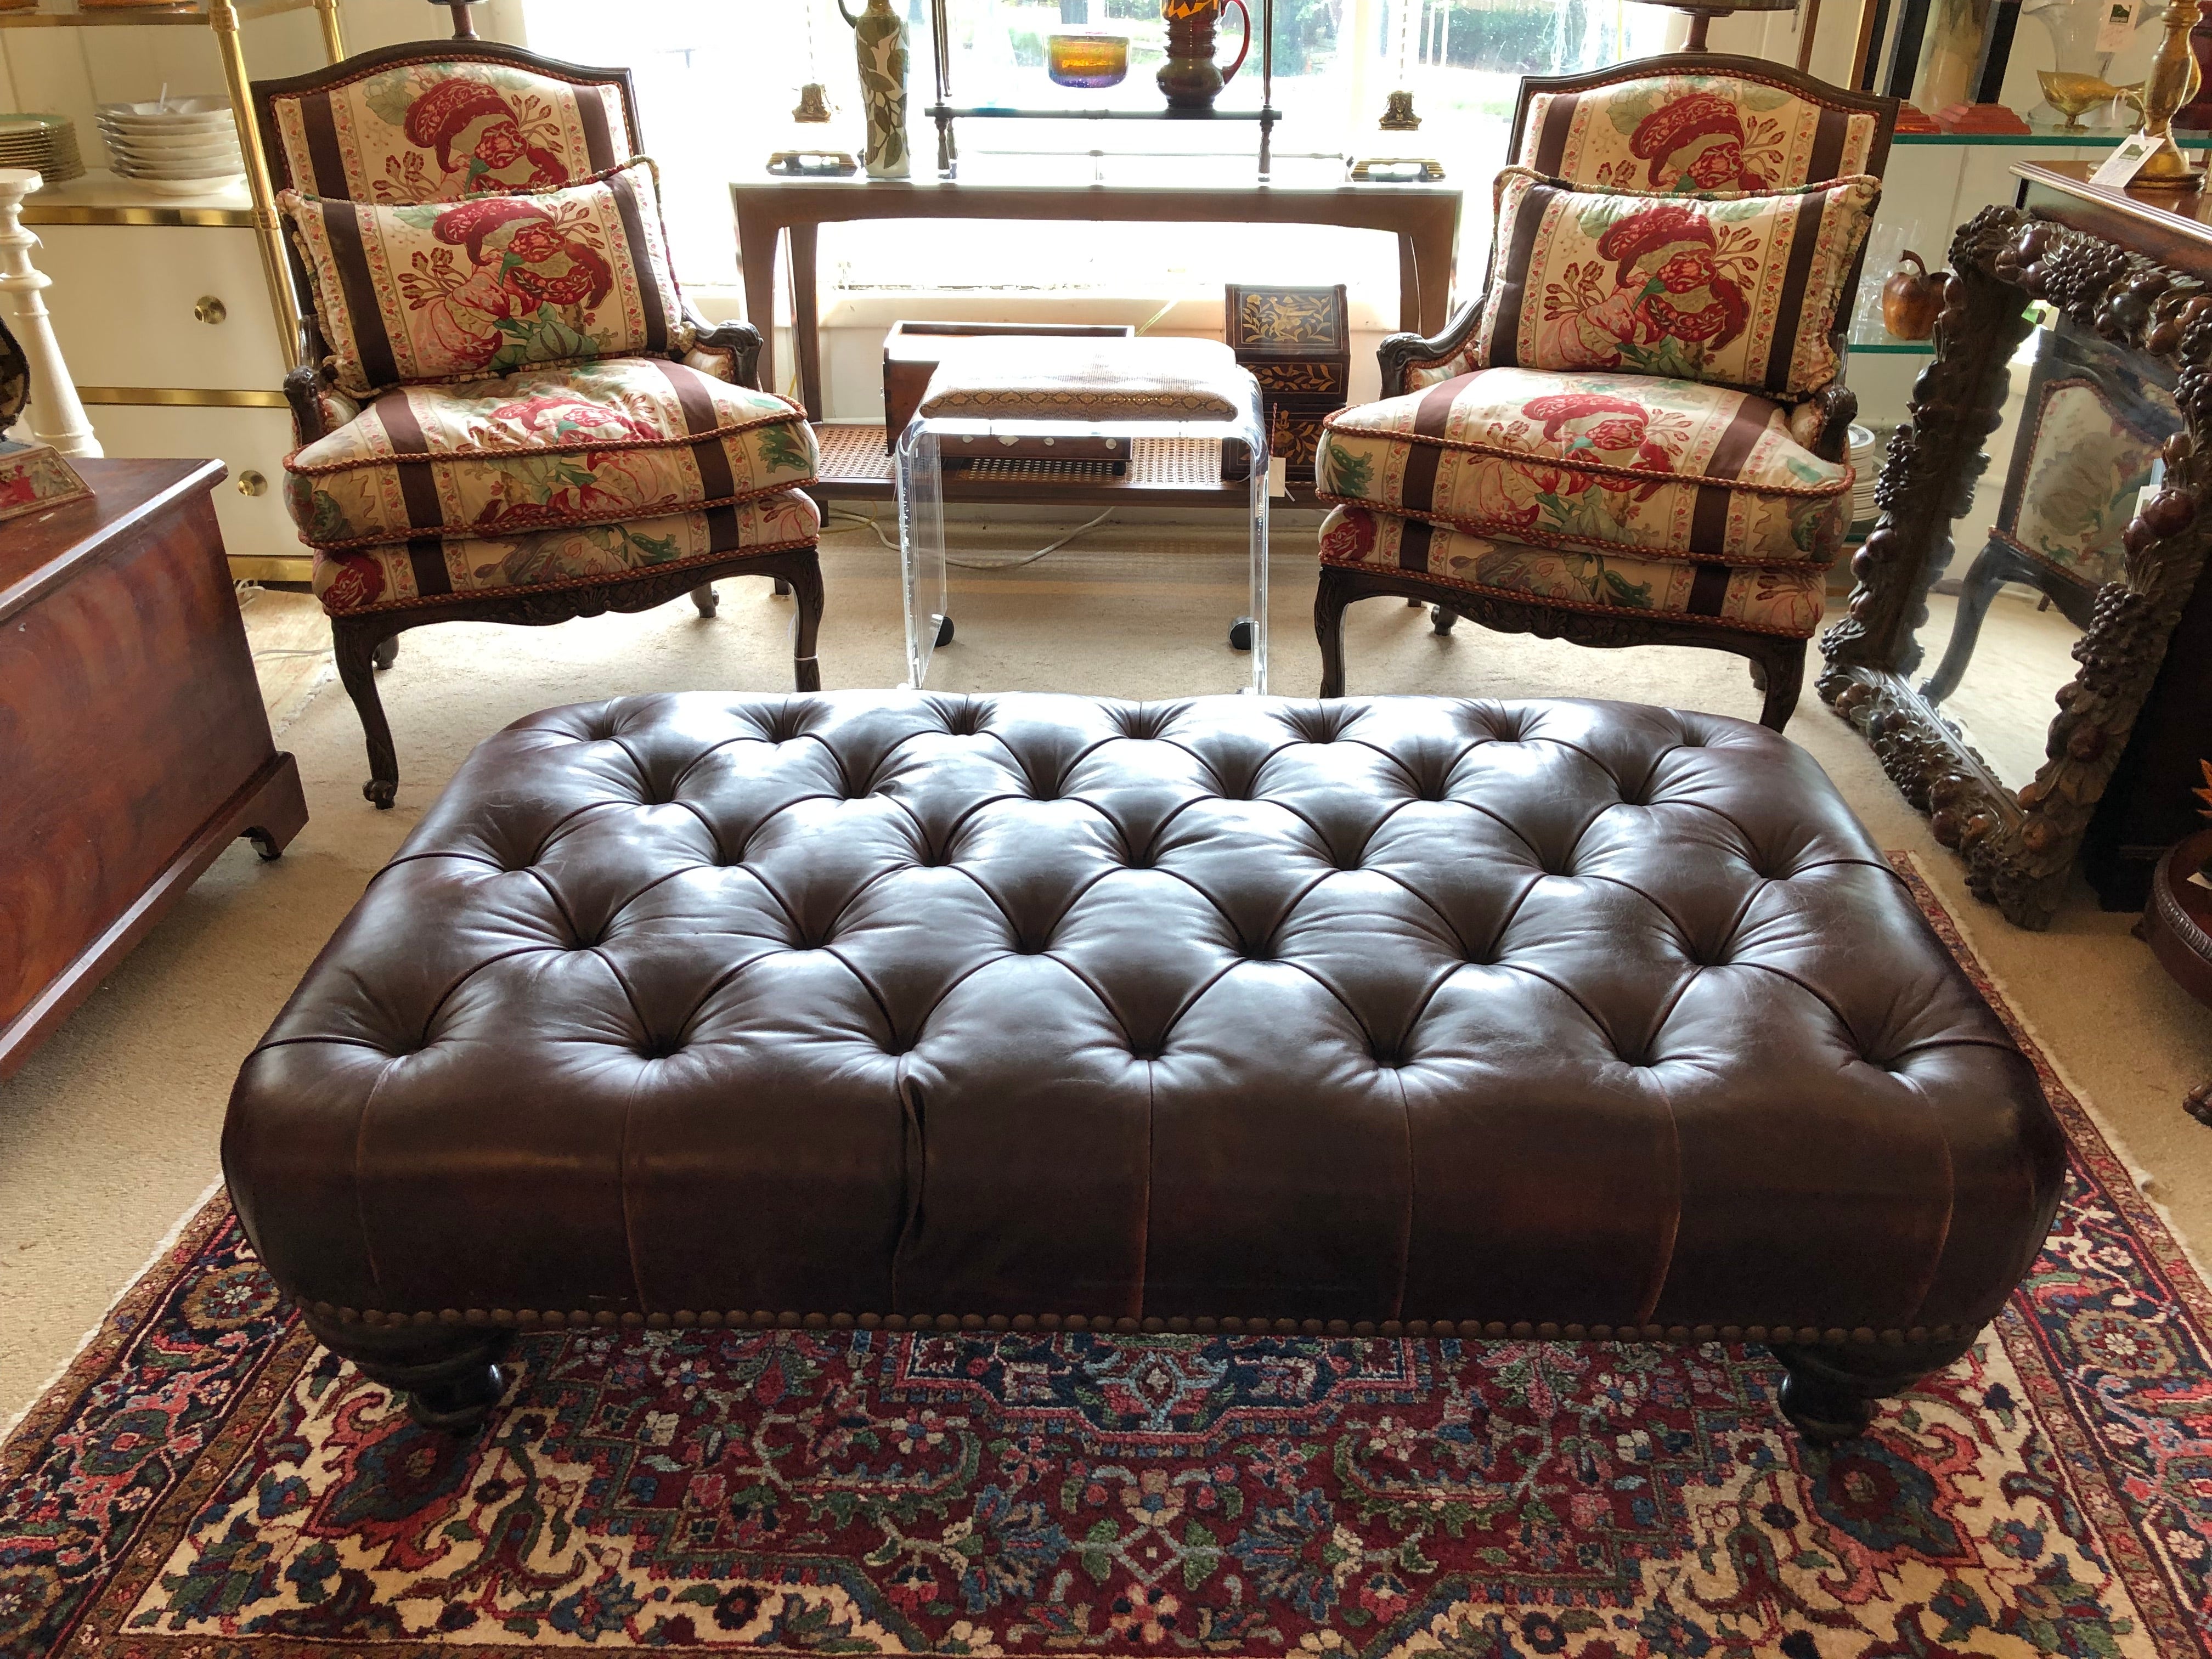 Classic rich George Smith tobacco tufted leather ottoman in the chesterfield style having mahogany bun feet and brass nailheads around the base.  Newly oiled and waxed and to its utmost luxuriousness!  Great as a coffee table offering extra seating